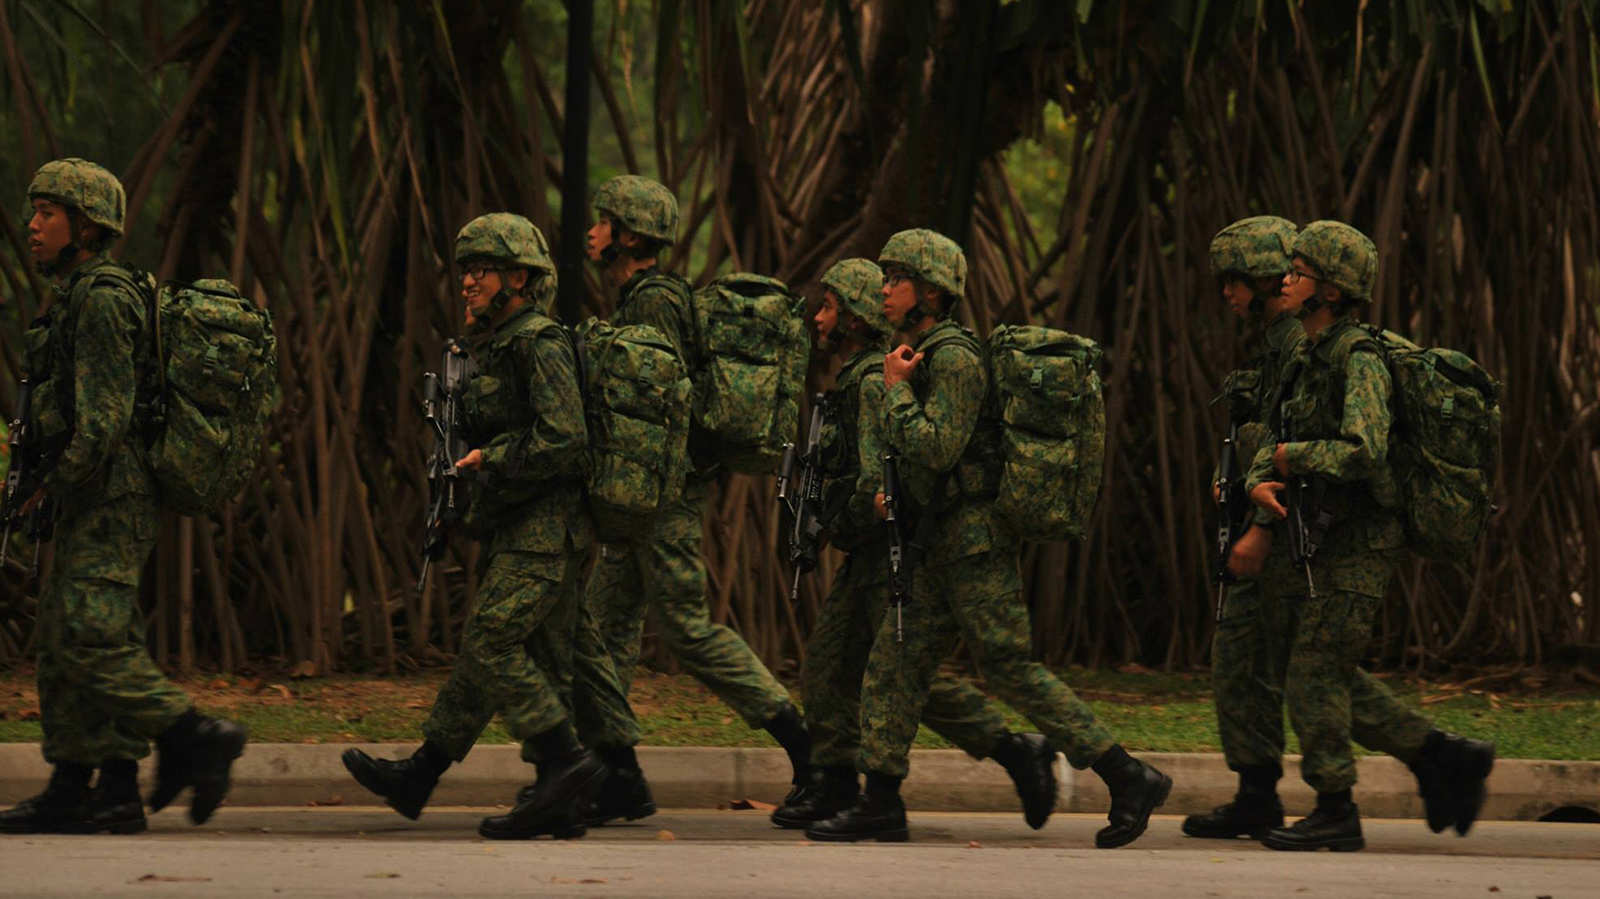 Demanding our army recruits complete the 24km march reveals an outdated and dangerous mindset